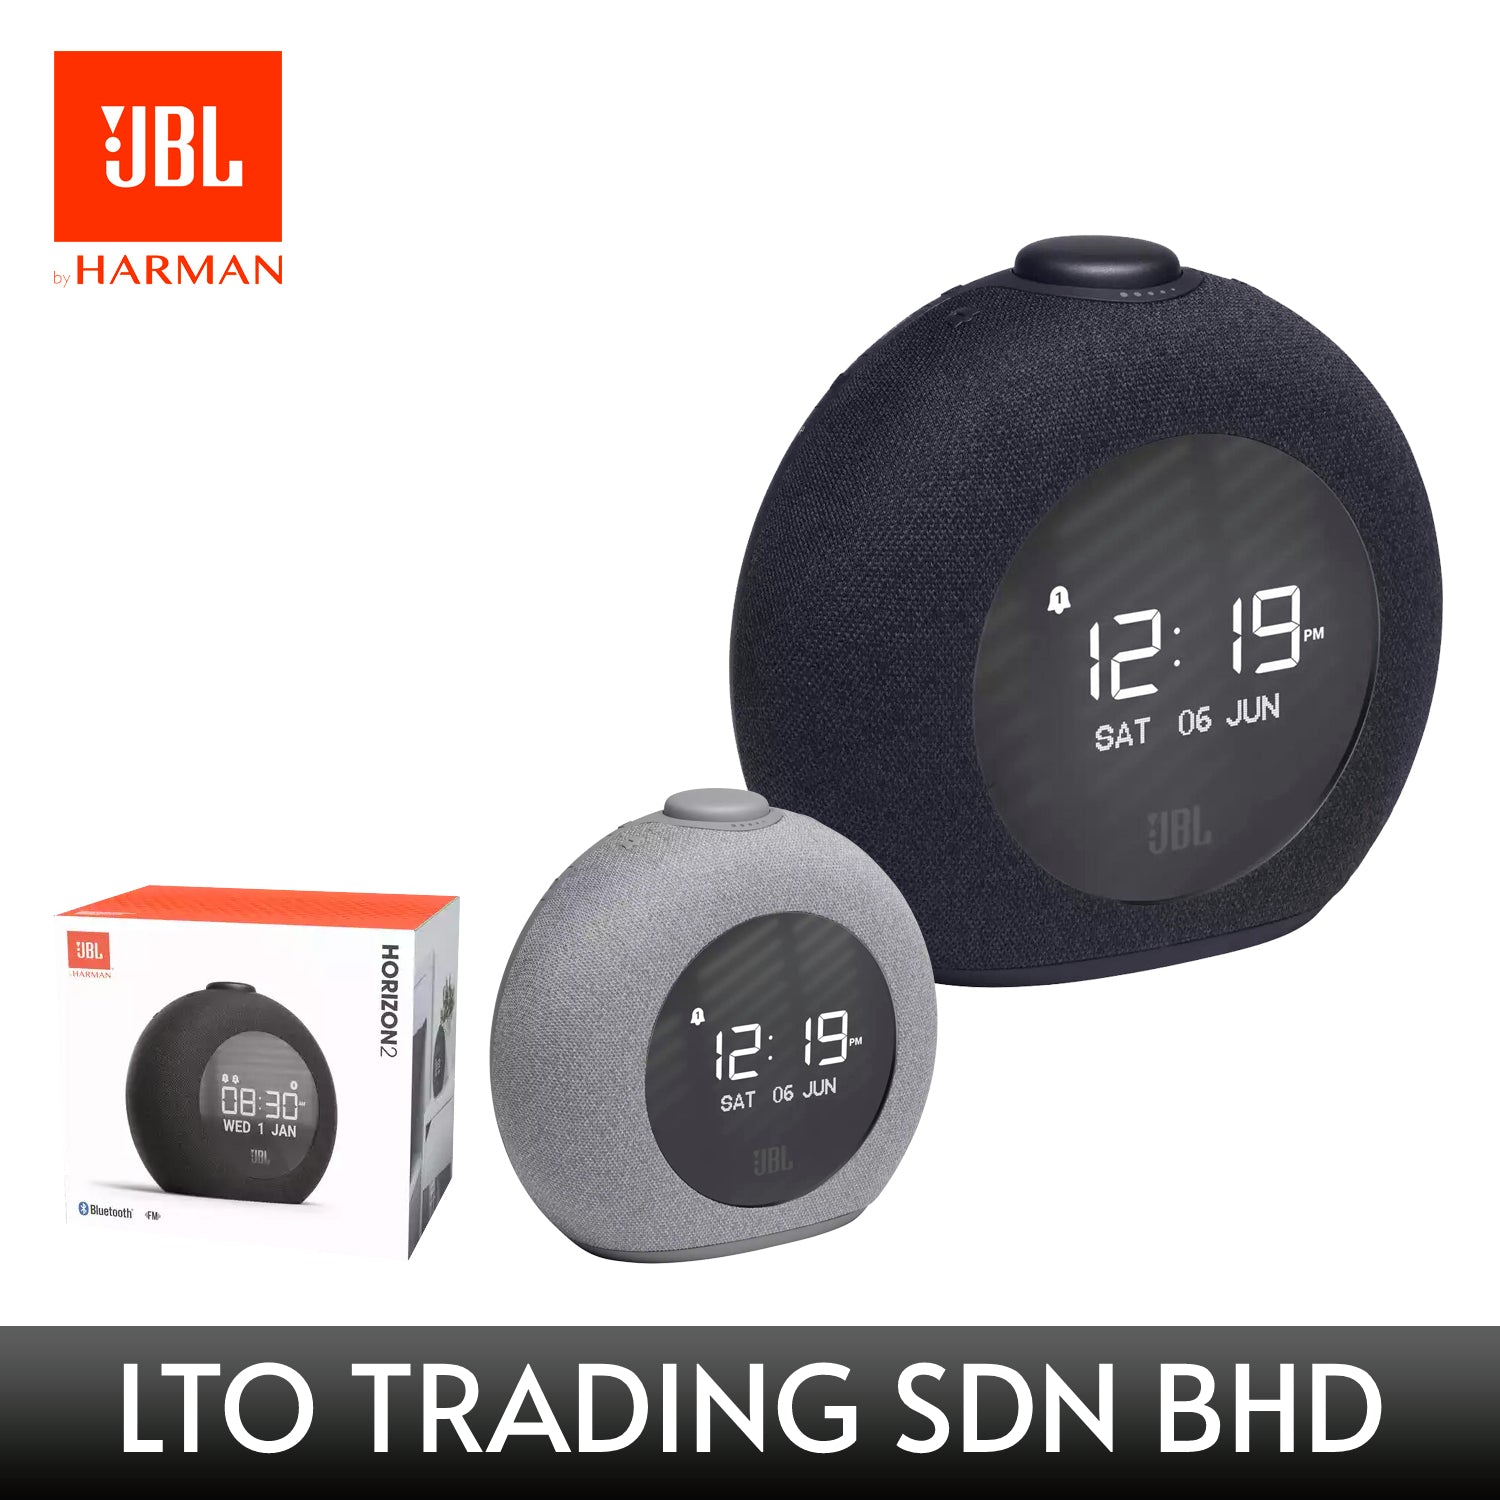 JBL Horizon 2 Clock with Bluetooth PA SYSTEM MALAYSIA - Design and Build with Public Address System